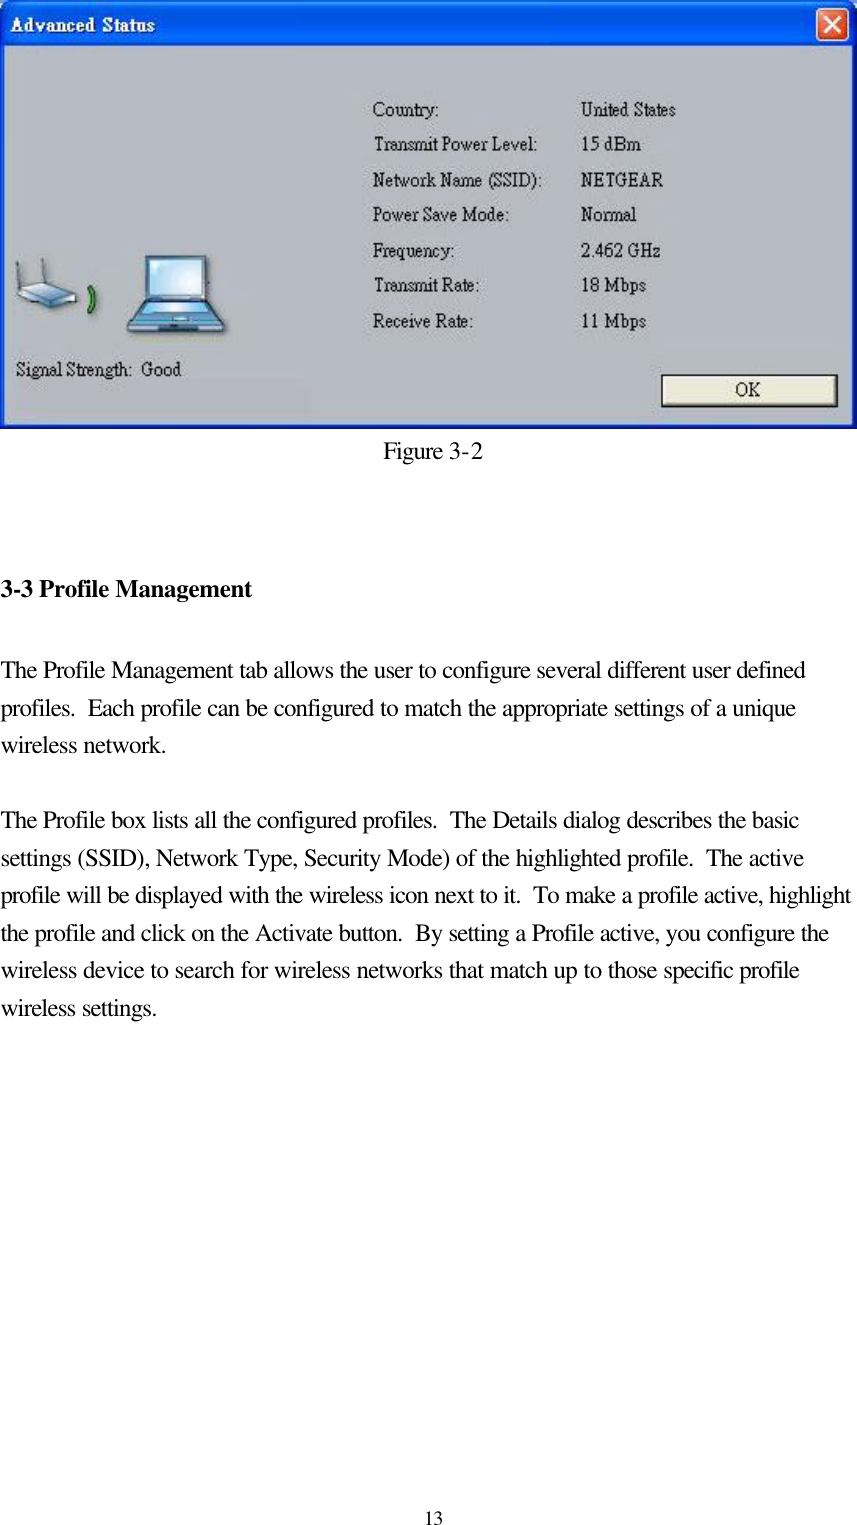  13Figure 3-2   3-3 Profile Management  The Profile Management tab allows the user to configure several different user defined profiles.  Each profile can be configured to match the appropriate settings of a unique wireless network.  The Profile box lists all the configured profiles.  The Details dialog describes the basic settings (SSID), Network Type, Security Mode) of the highlighted profile.  The active profile will be displayed with the wireless icon next to it.  To make a profile active, highlight the profile and click on the Activate button.  By setting a Profile active, you configure the wireless device to search for wireless networks that match up to those specific profile wireless settings.  